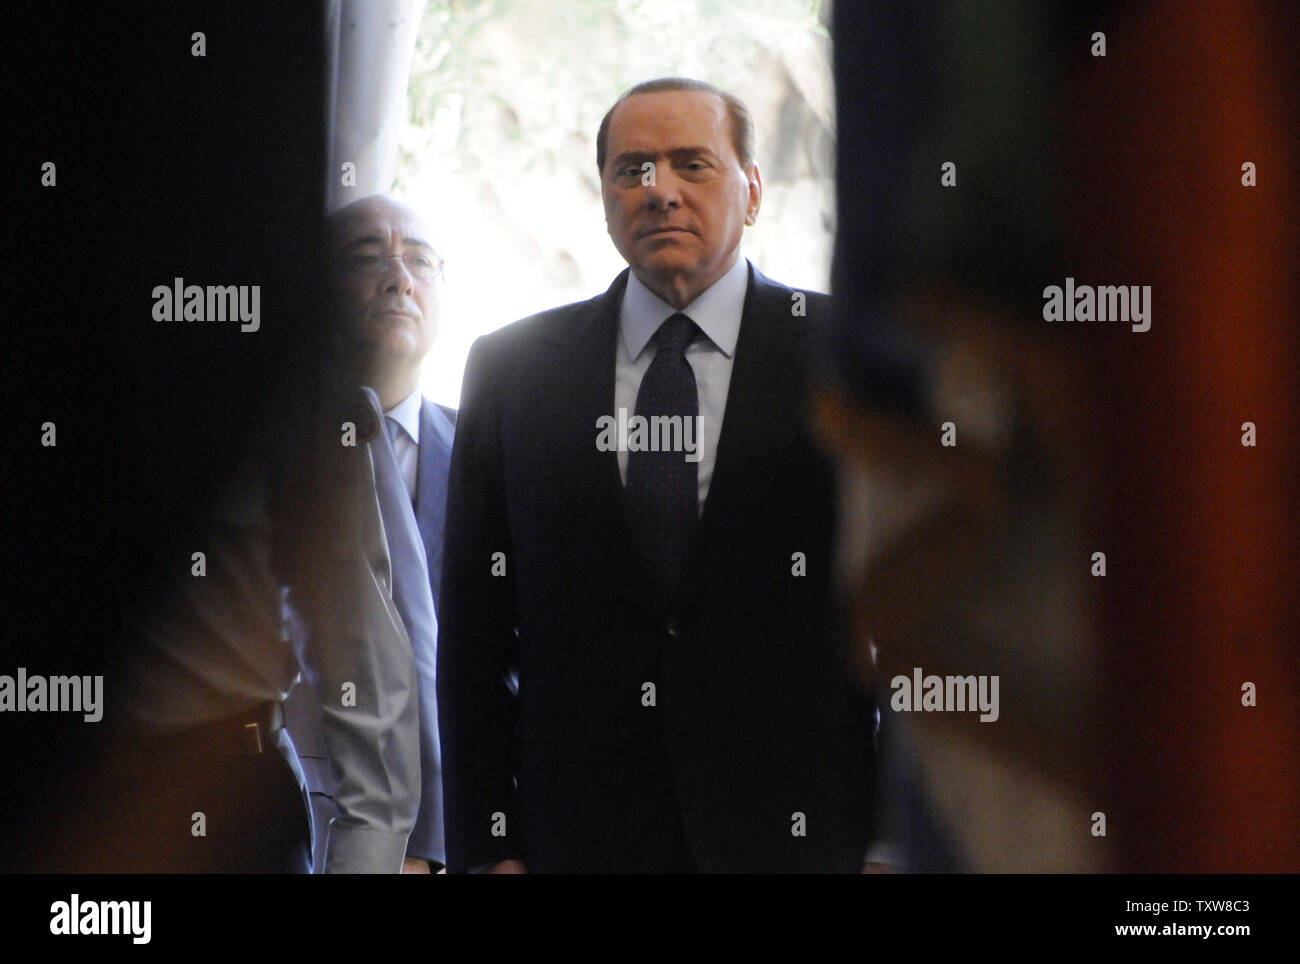 Italian Prime Minister Silvio Berlusconi arrives for a welcoming ceremony at the office of Israeli Prime Minister Benjamin Netanyahu in Jerusalem, February 1, 2010. Prime Minister Berlusconi is in Israel for a three- day visit.   UPI/Debbie Hill Stock Photo